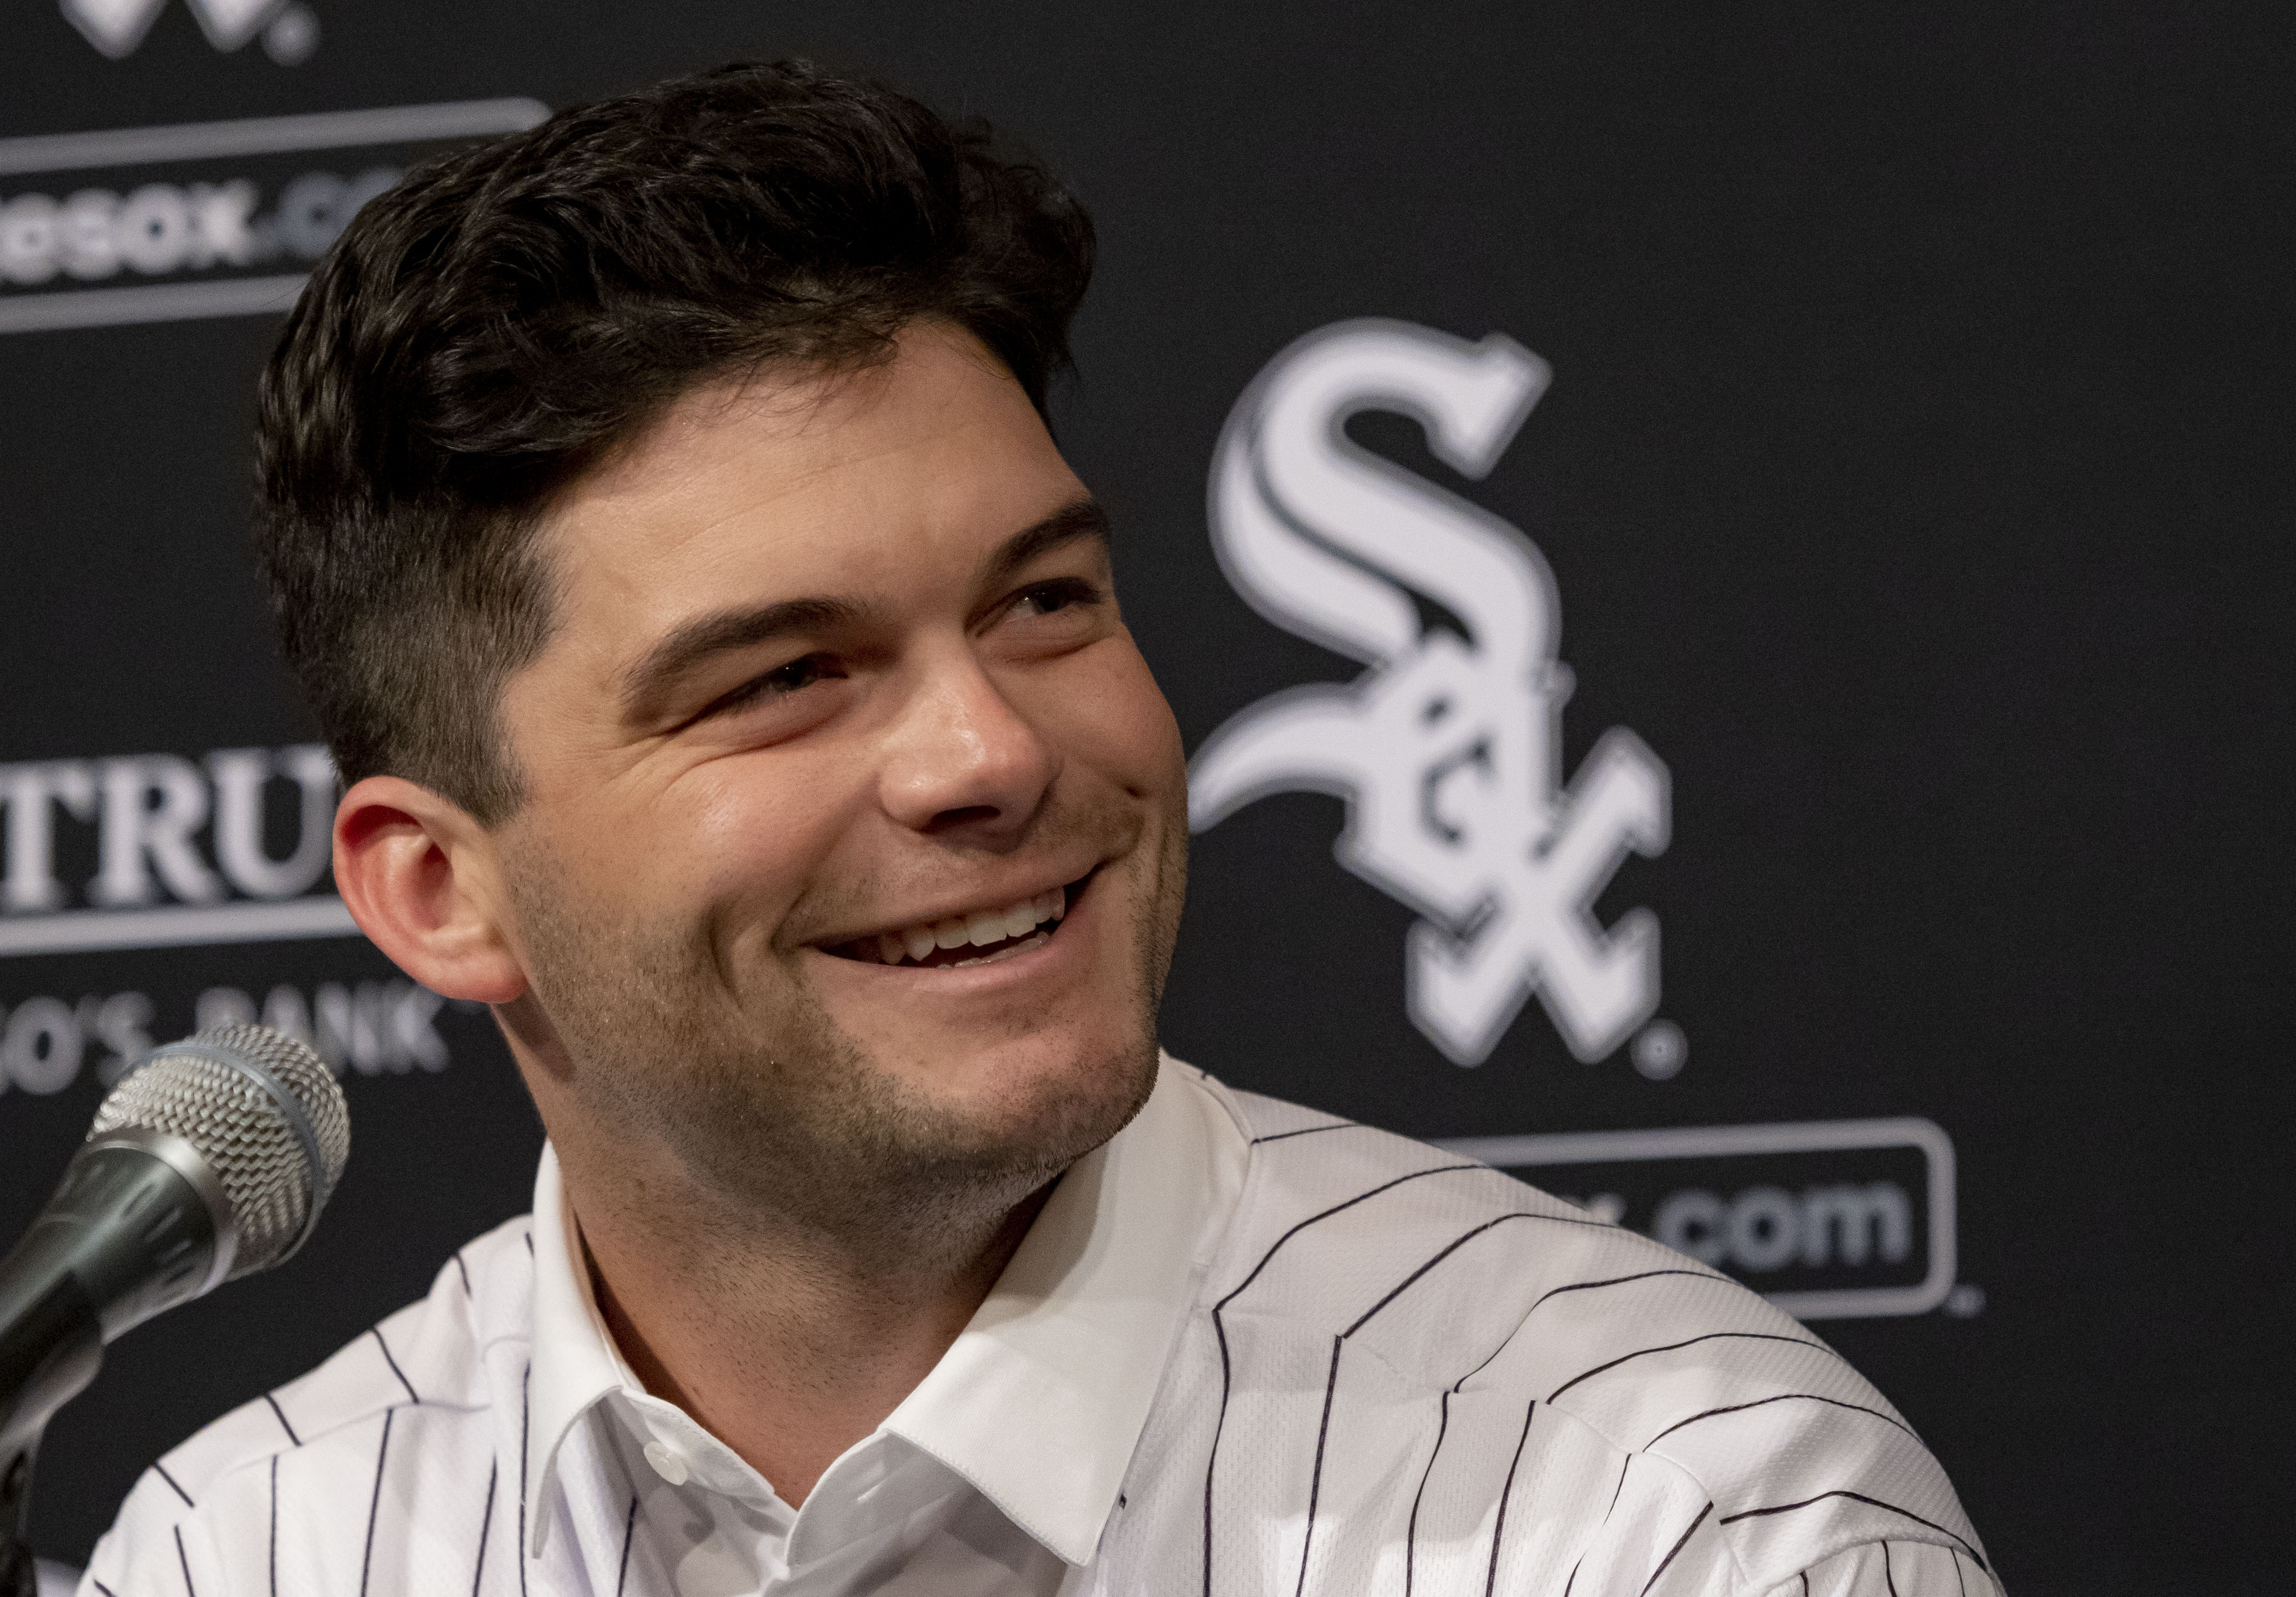 Andrew Benintendi-White Sox deal proves Yankees were right to